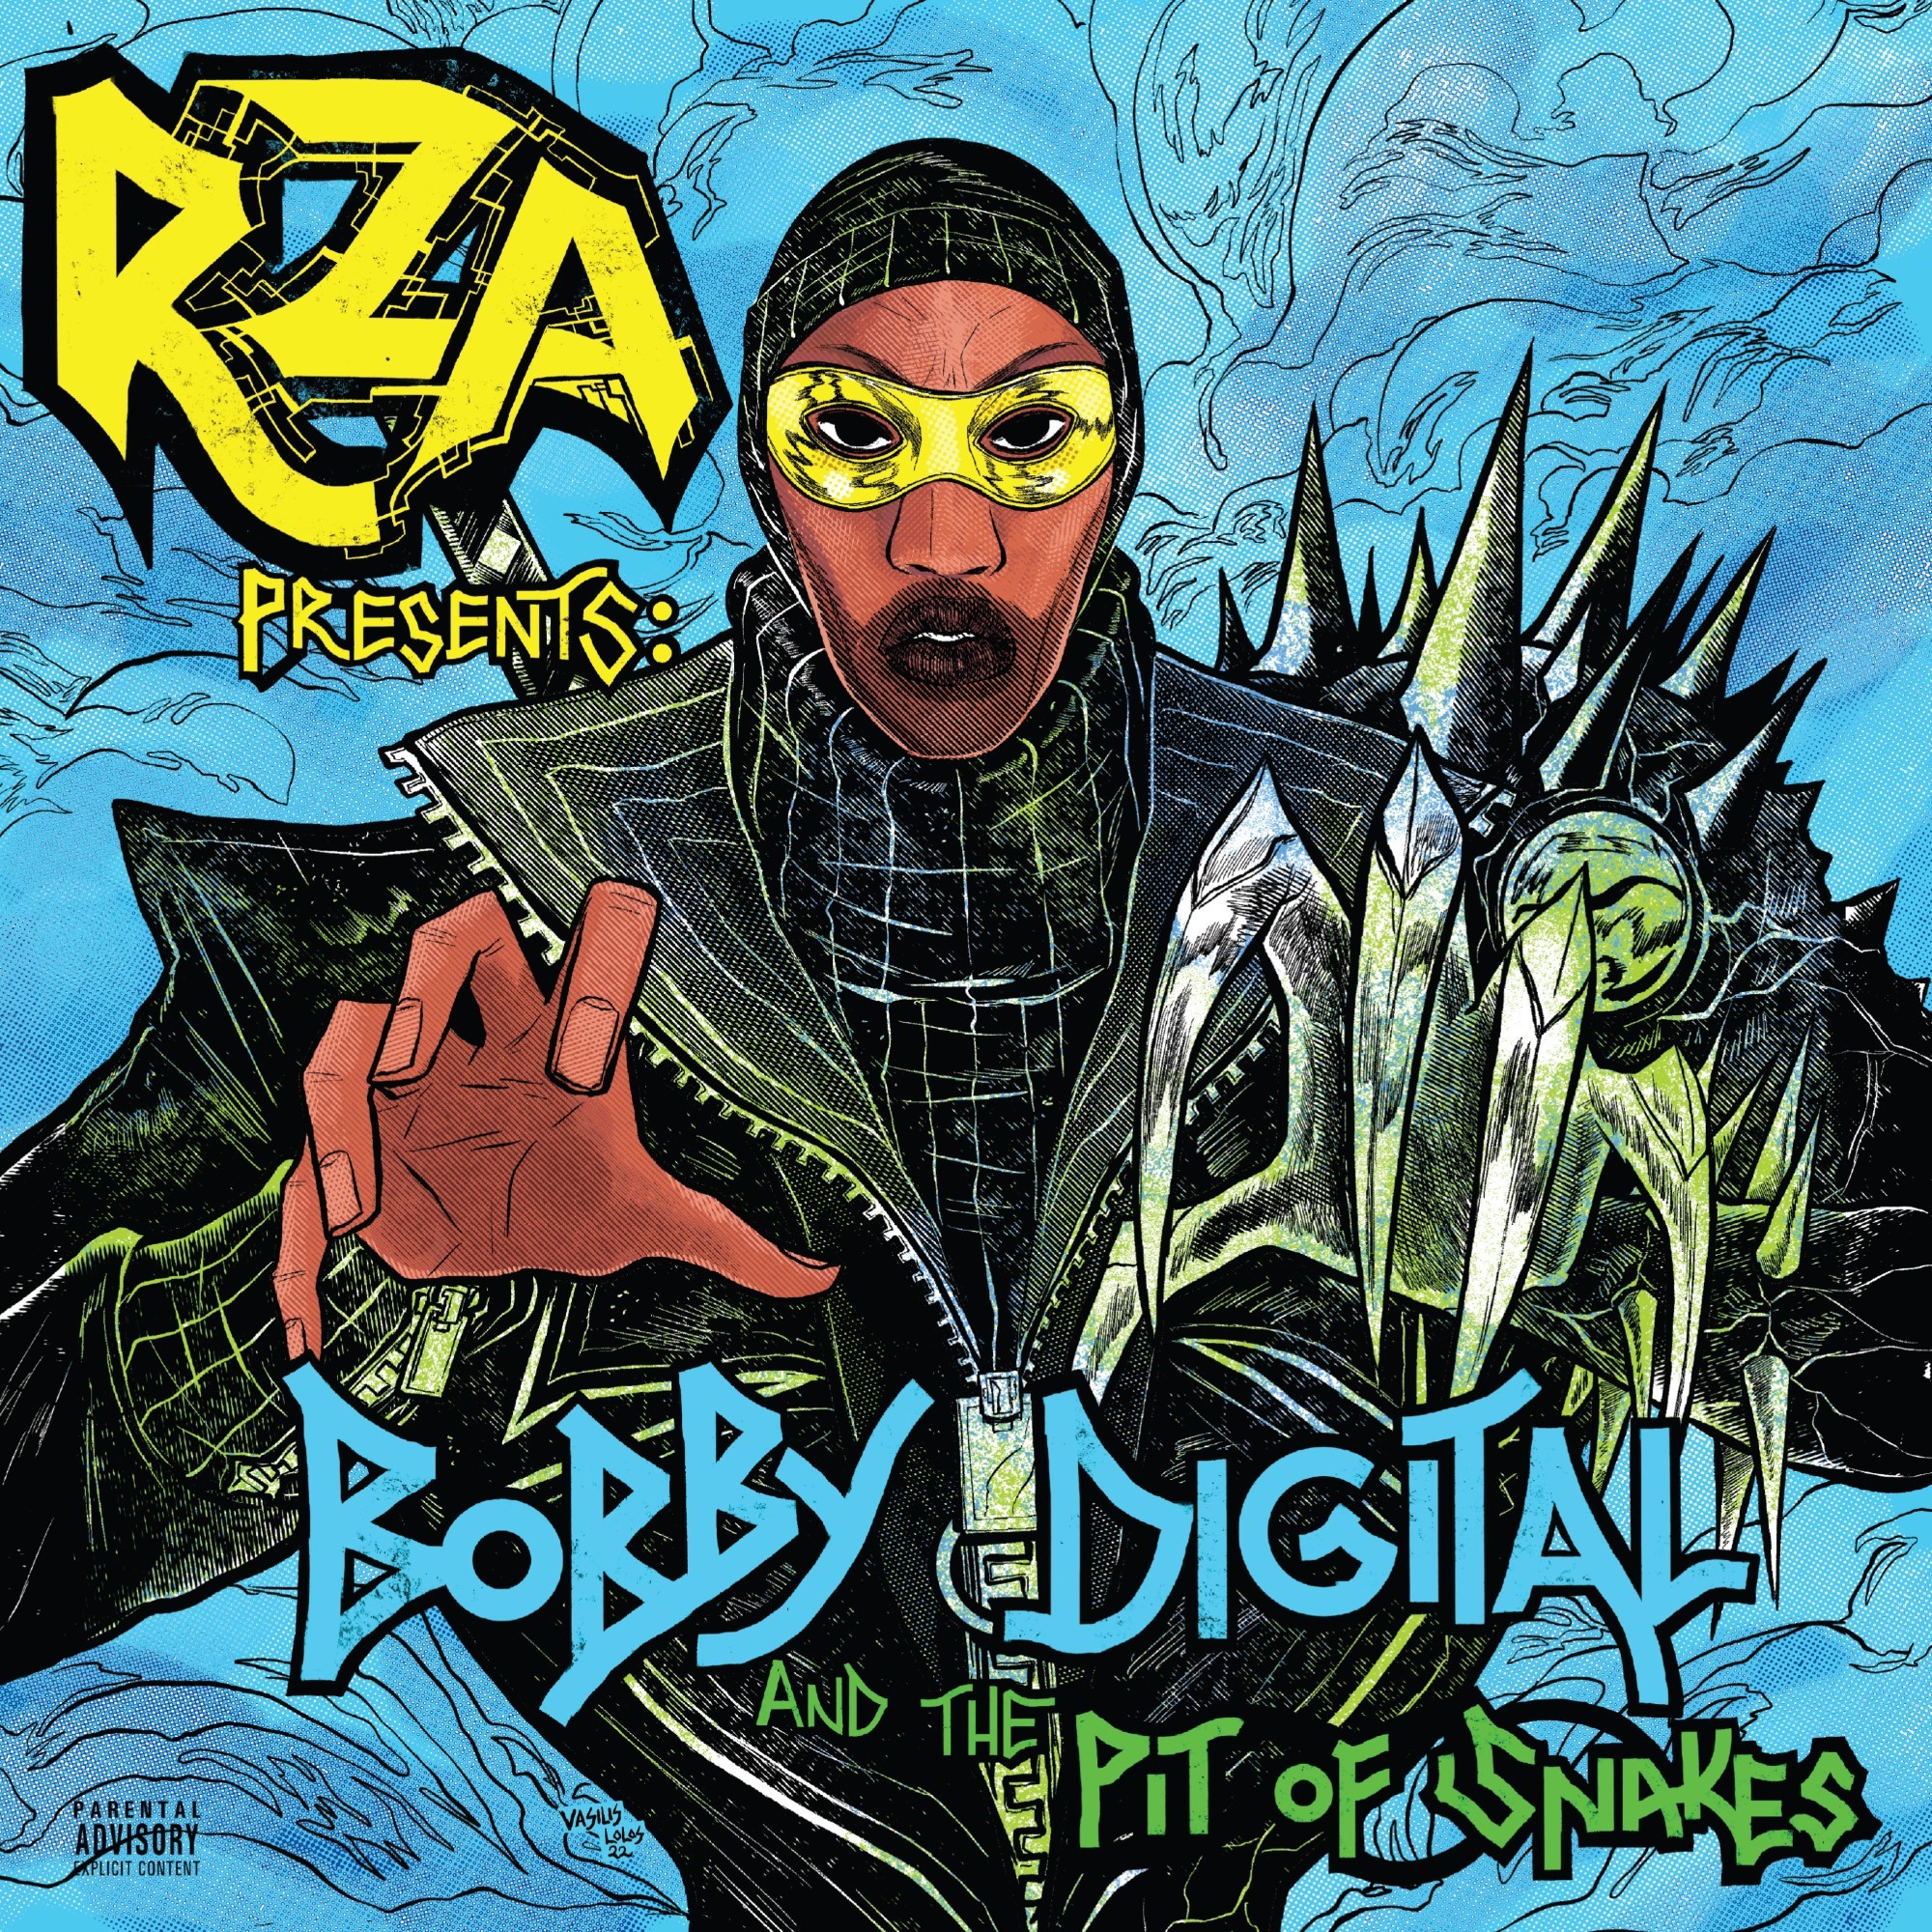 Bobby Digital and the Pit of SnakesBobby Digital and the Pit of Snakes|Rza